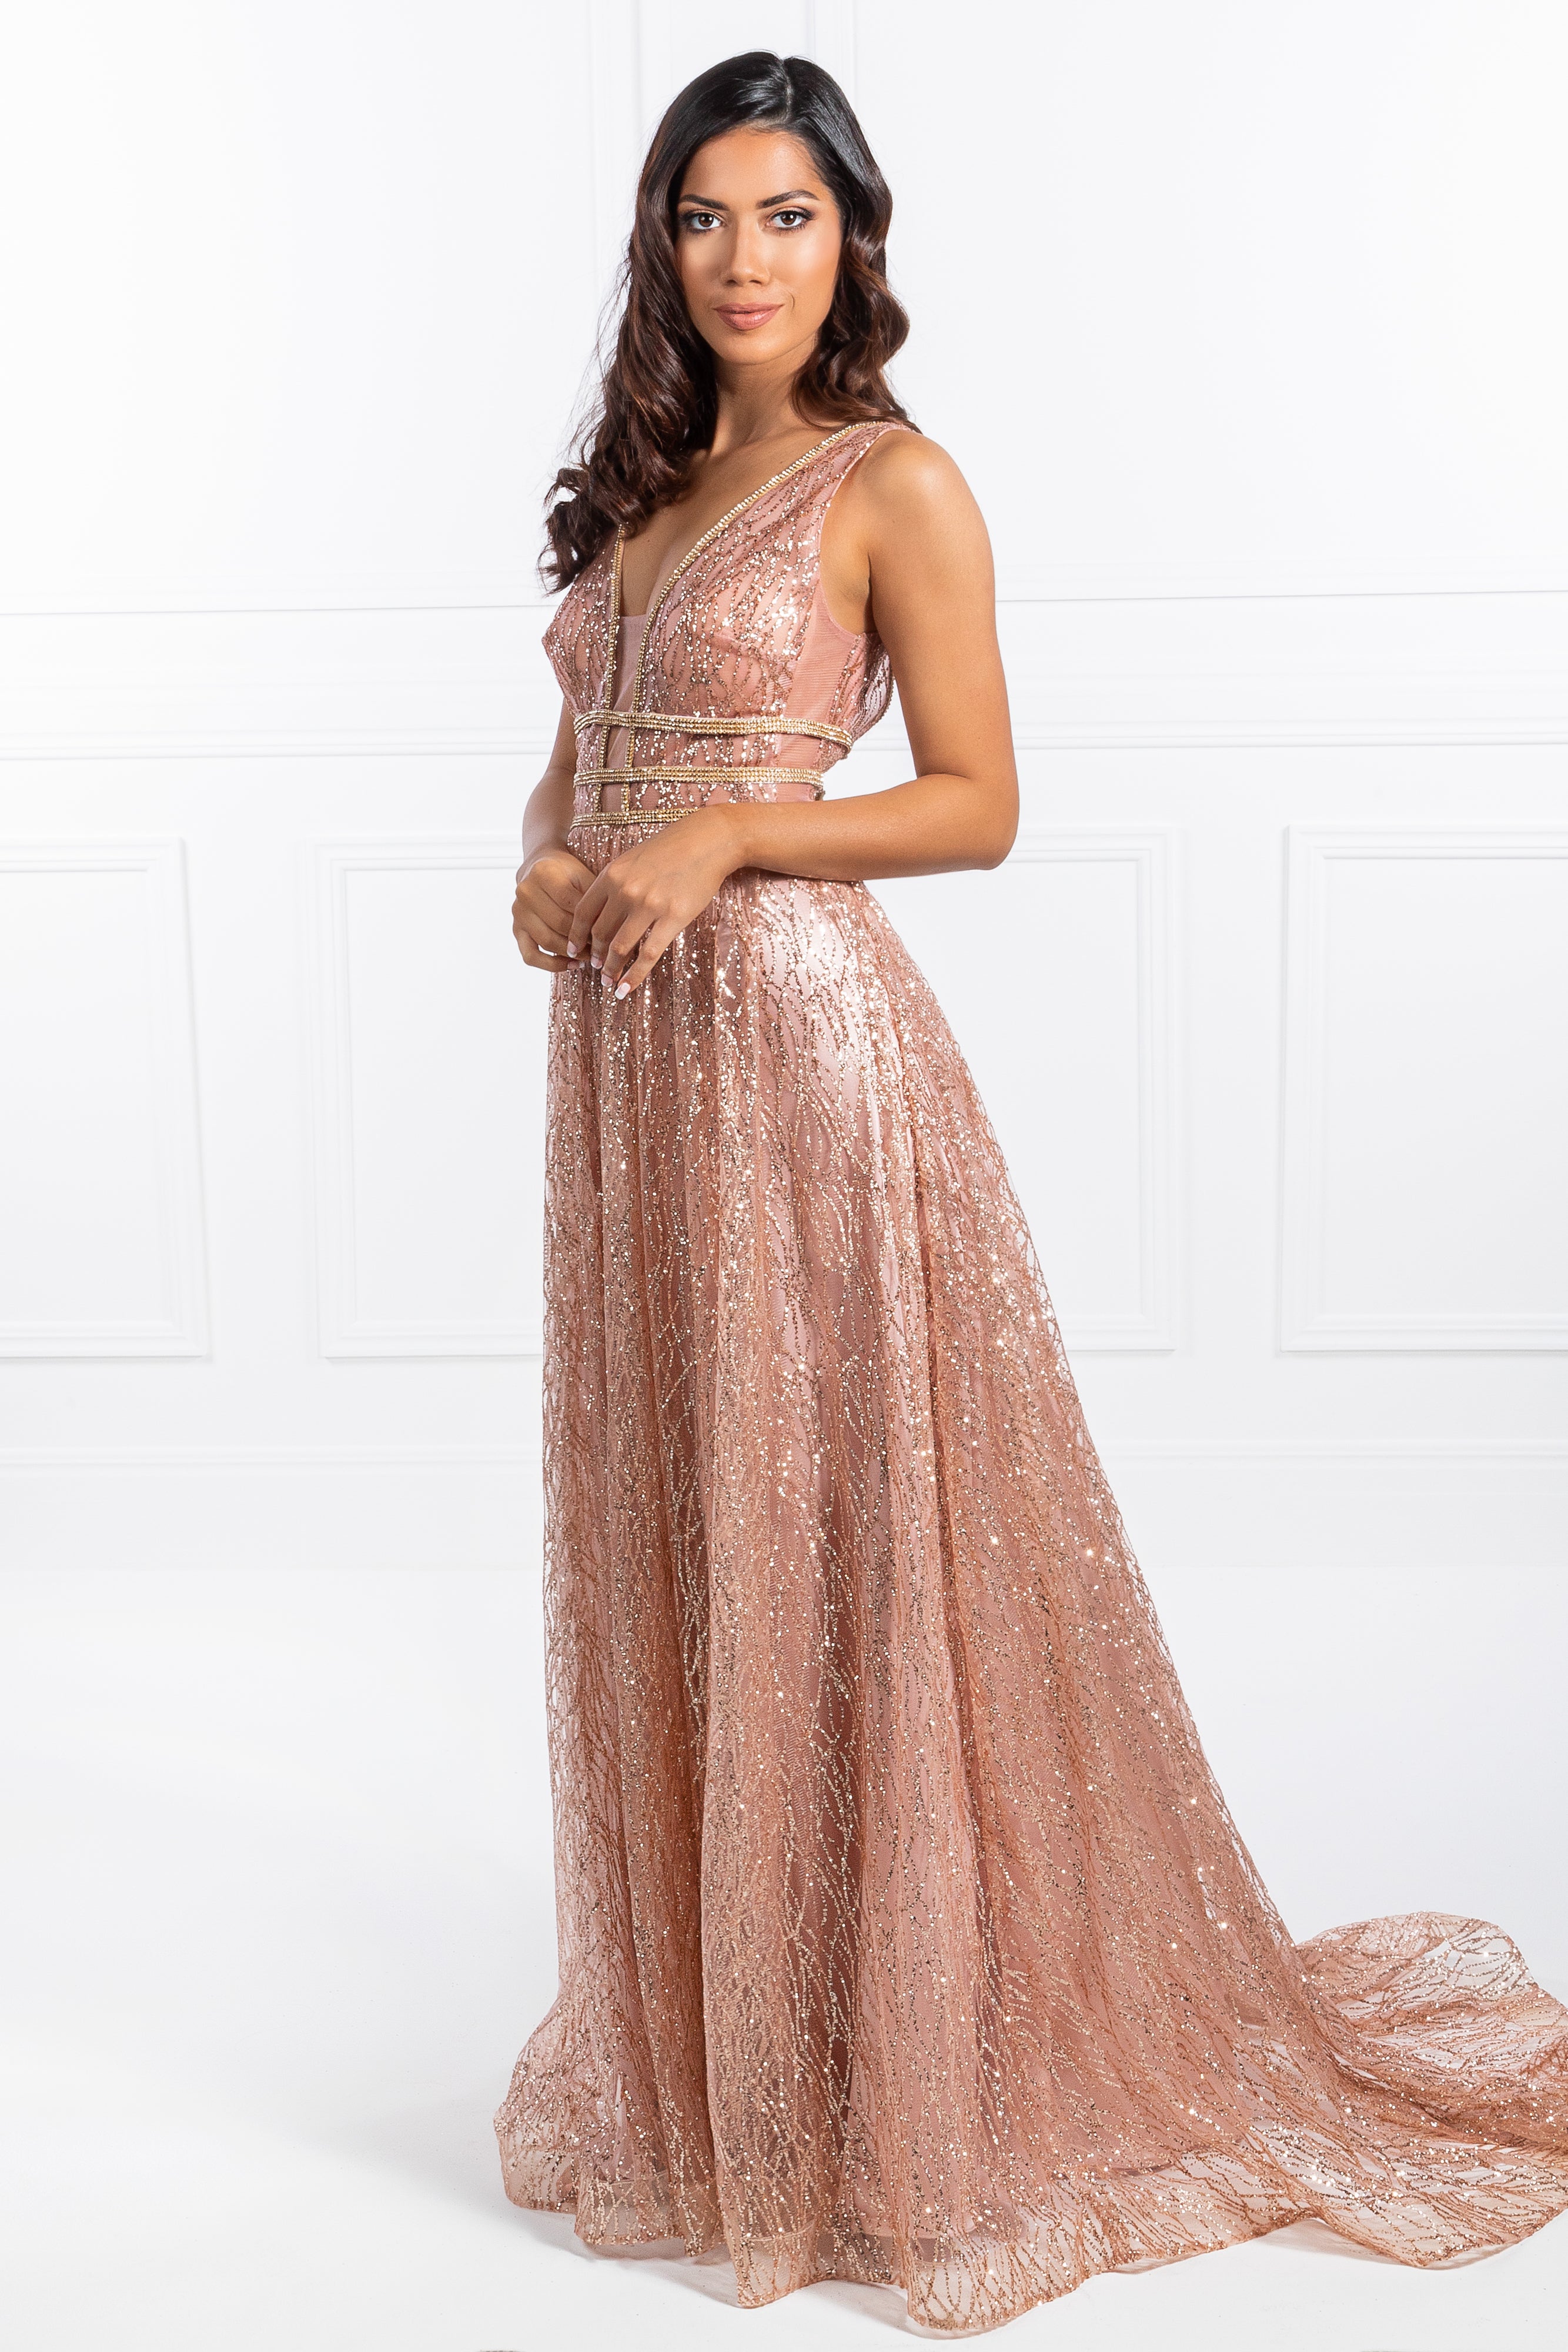 Honey Couture ENYA Rose Gold Glitter Formal Gown